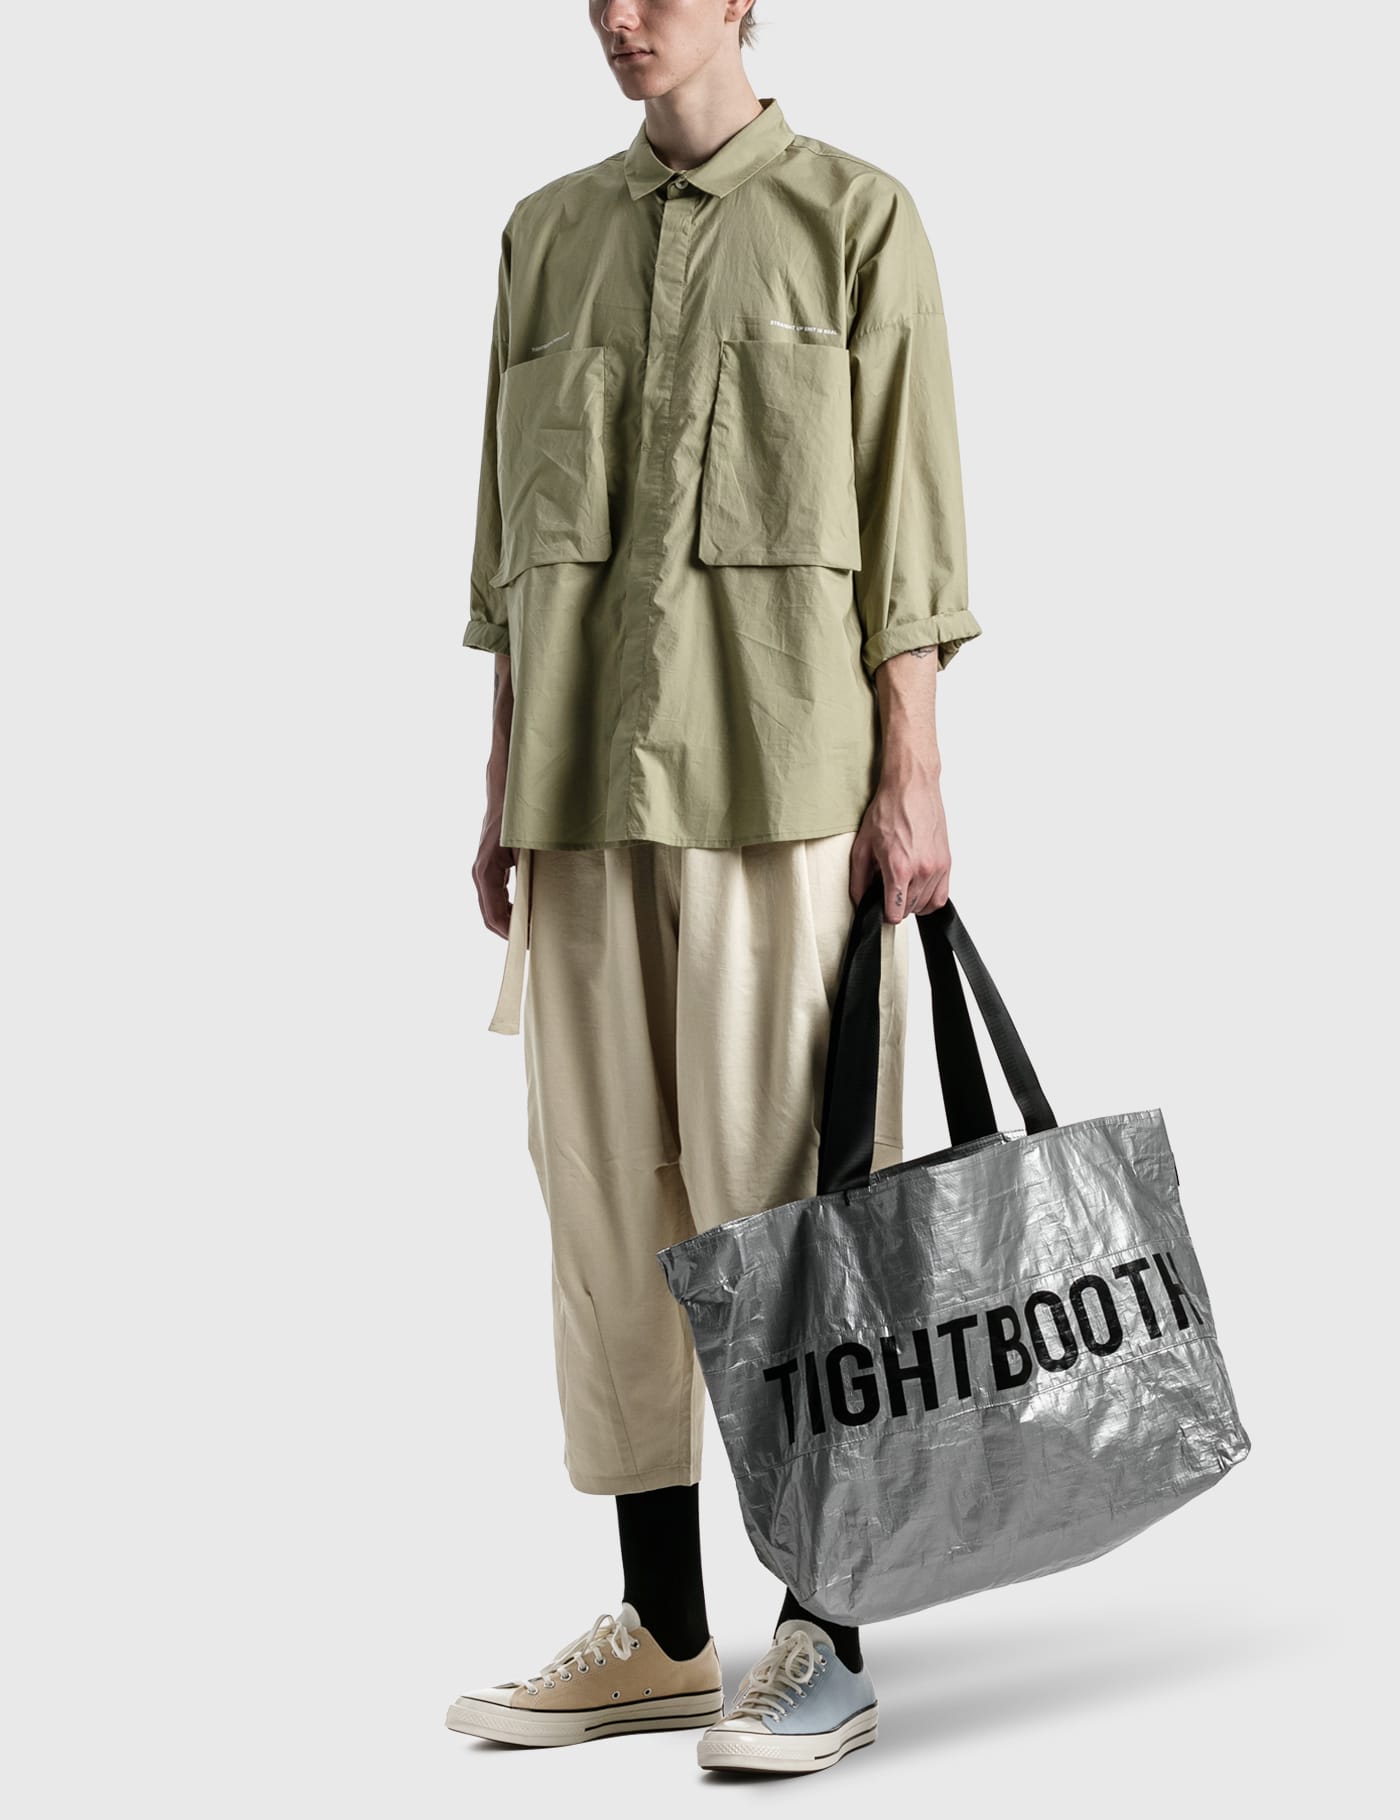 TIGHTBOOTH - Balloon Pants | HBX - Globally Curated Fashion and 